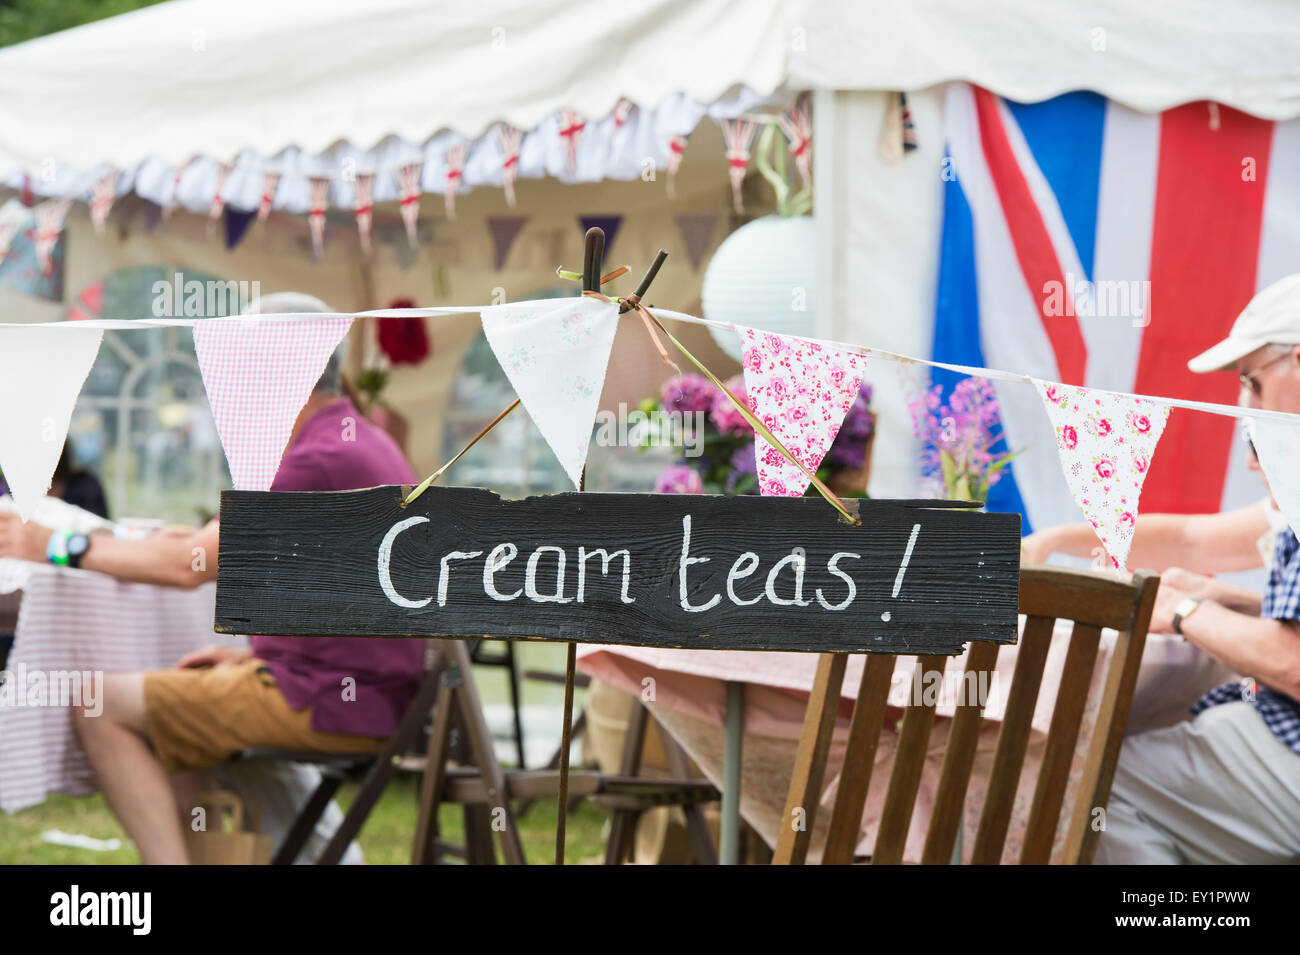 Cream Teas sign at the Thames Traditional Boat Festival, Fawley Meadows, Henley On Thames, England Stock Photo